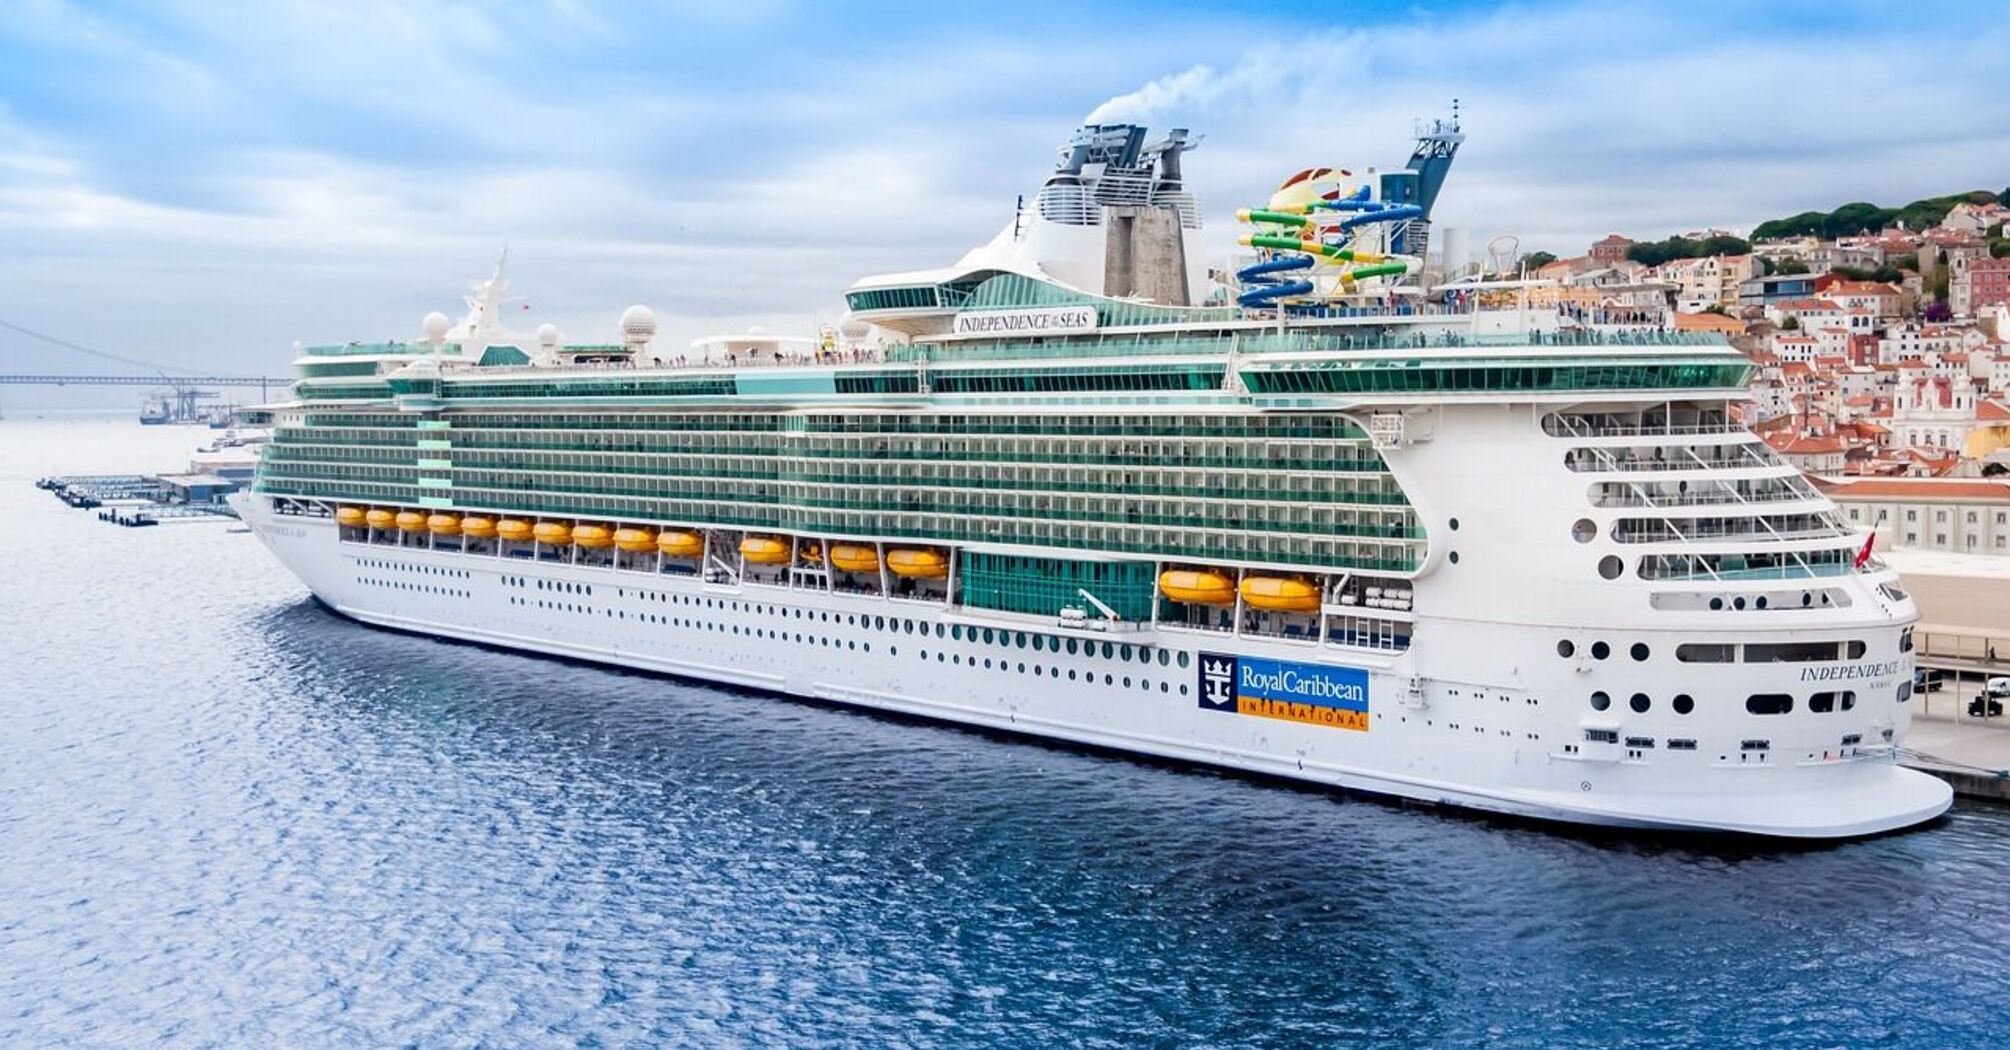 A cruise expert highlighted the key differences between vacationing with Royal Caribbean and Carnival